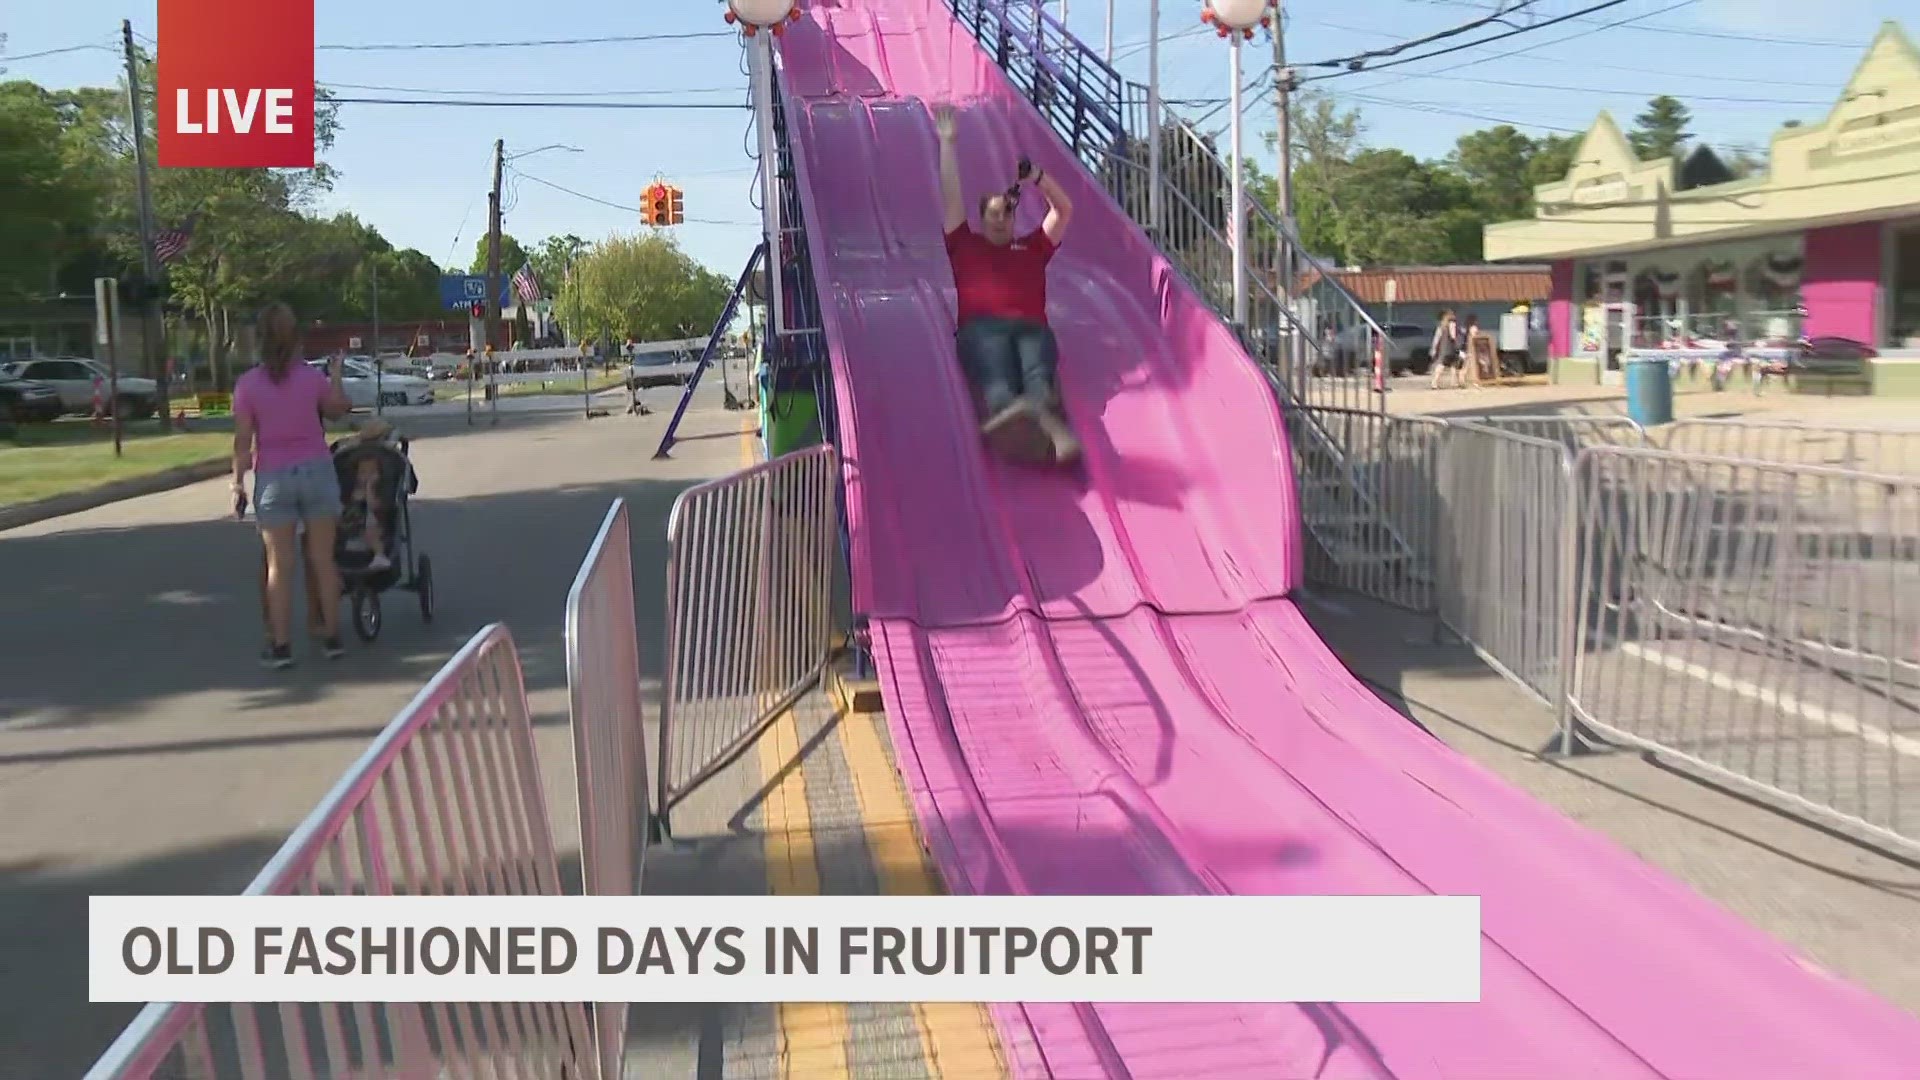 Great weather this Memorial Day Weekend to take in Old Fashioned Days in Fruitport! Watch as Meteorologist Michael Behrens slides into the fun!